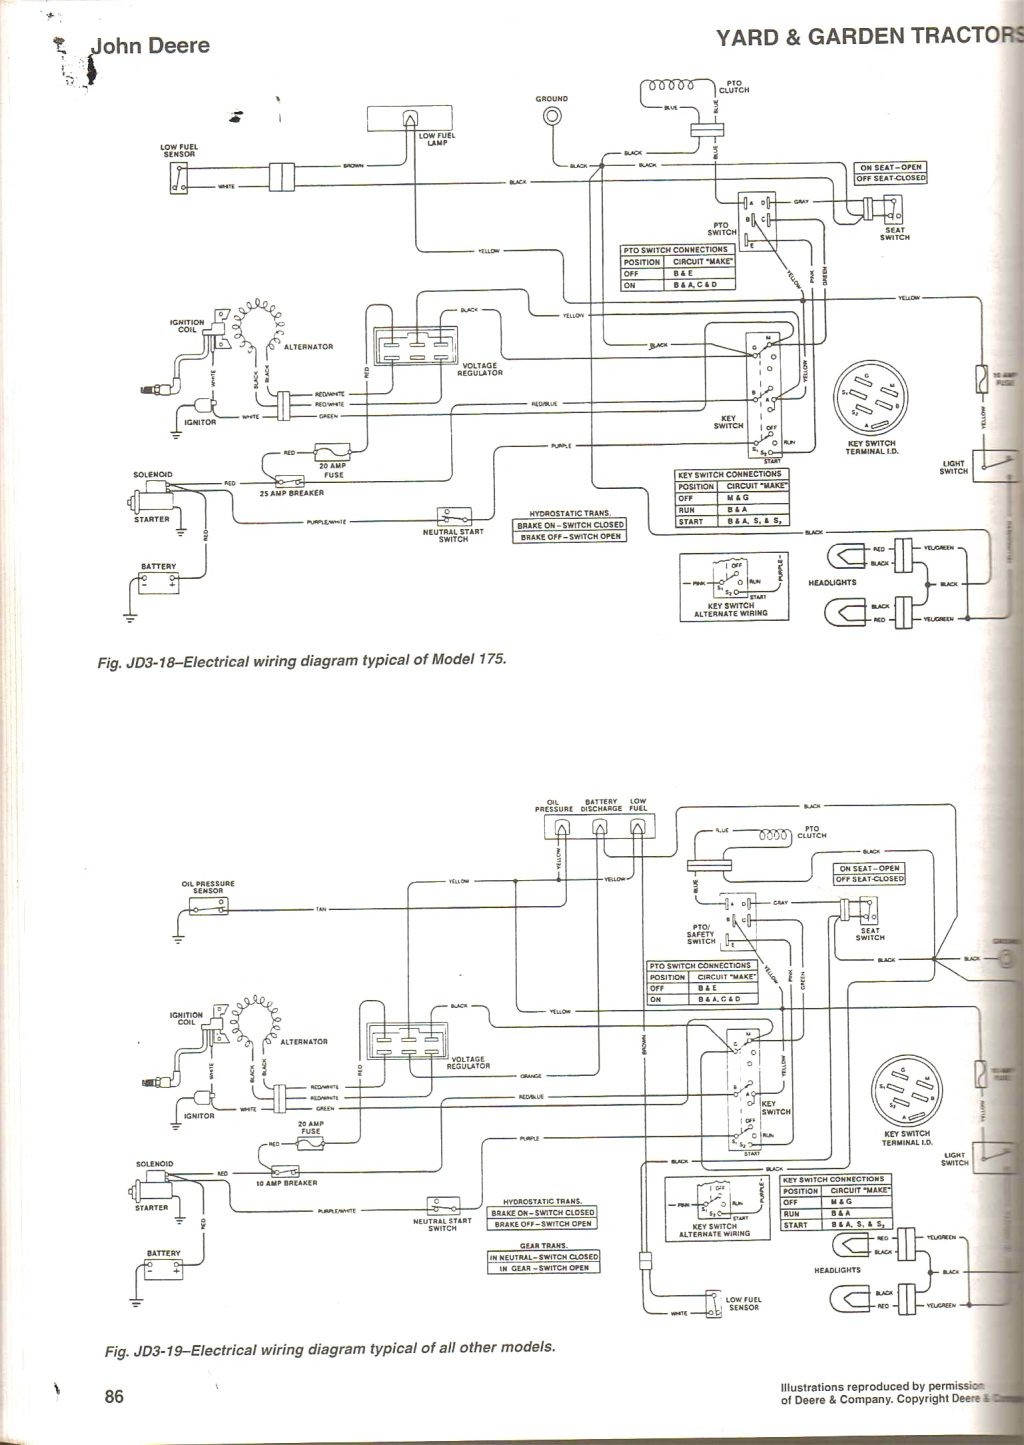 Gear Vendors Overdrive Wiring Diagram Fresh for Volovetsfo Wiring Diagram for Lionel Trains